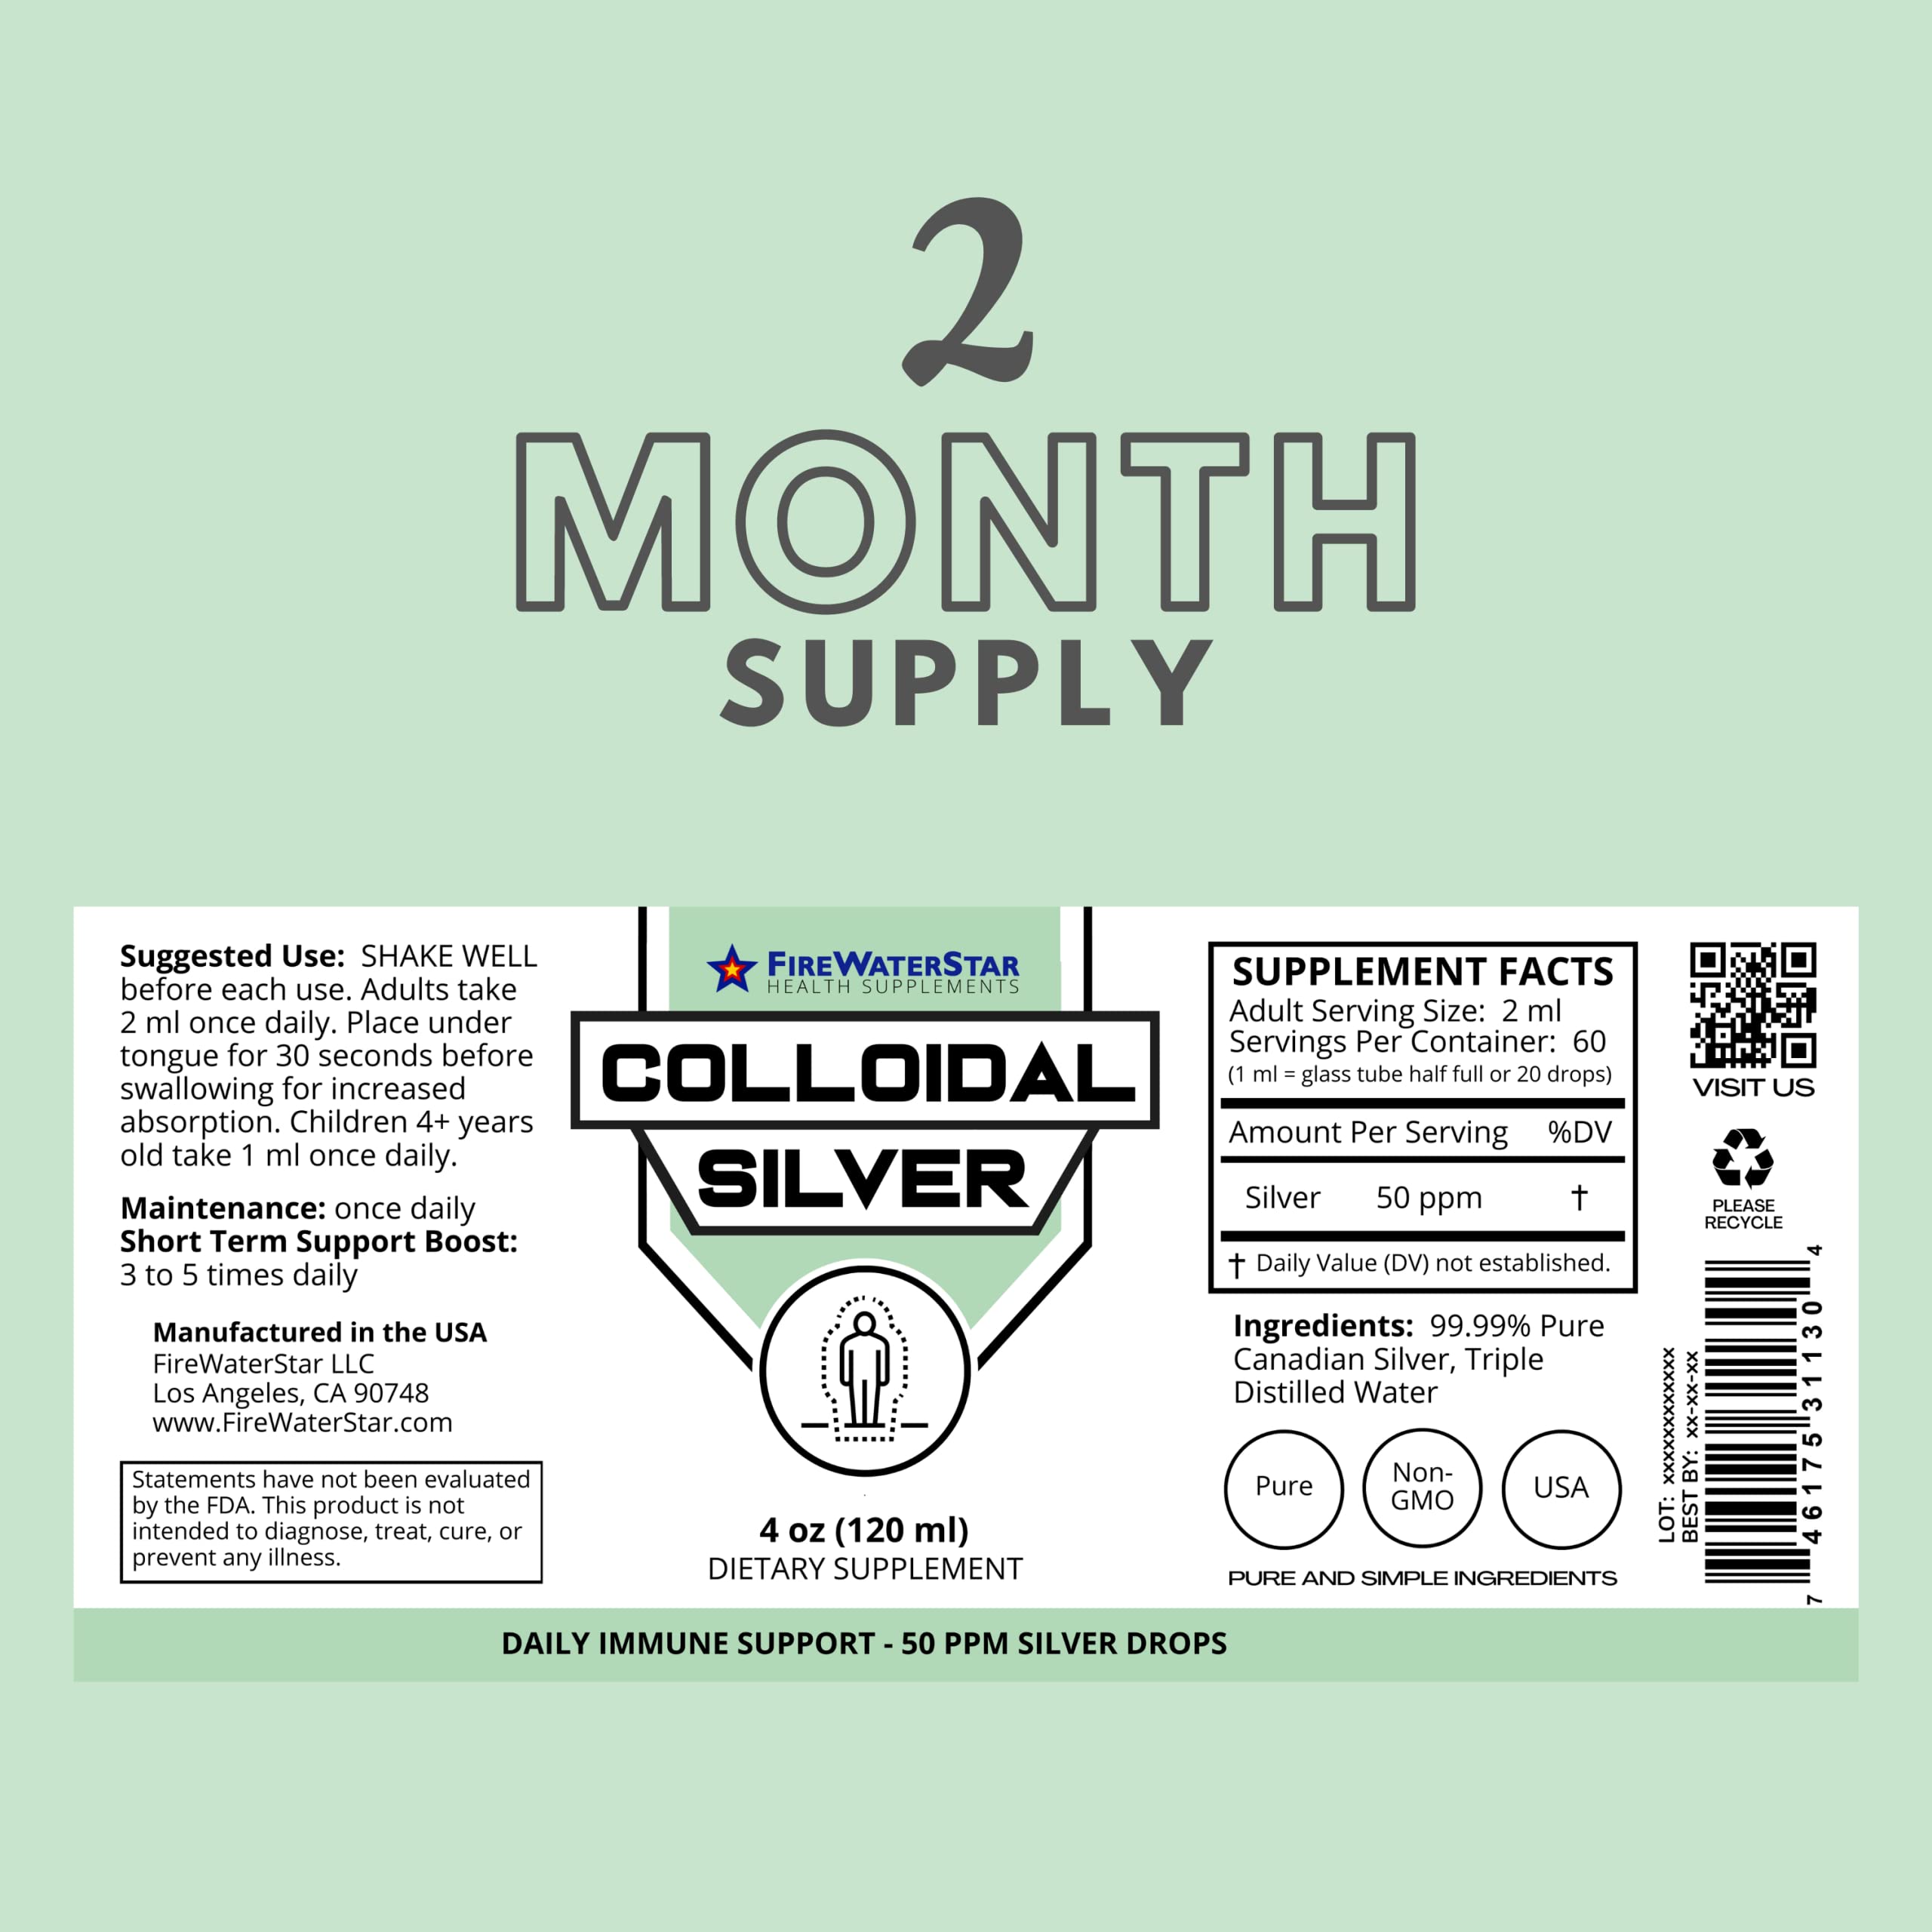 Colloidal Silver + Colloidal Silver Nasal Spray - 2oz - Ultra Fine Silver Mist - 50 ppm - 99.99% Purity - Sinus Relief - Helps with Dry, Irritated, Stuffy Nose - Immune System Support